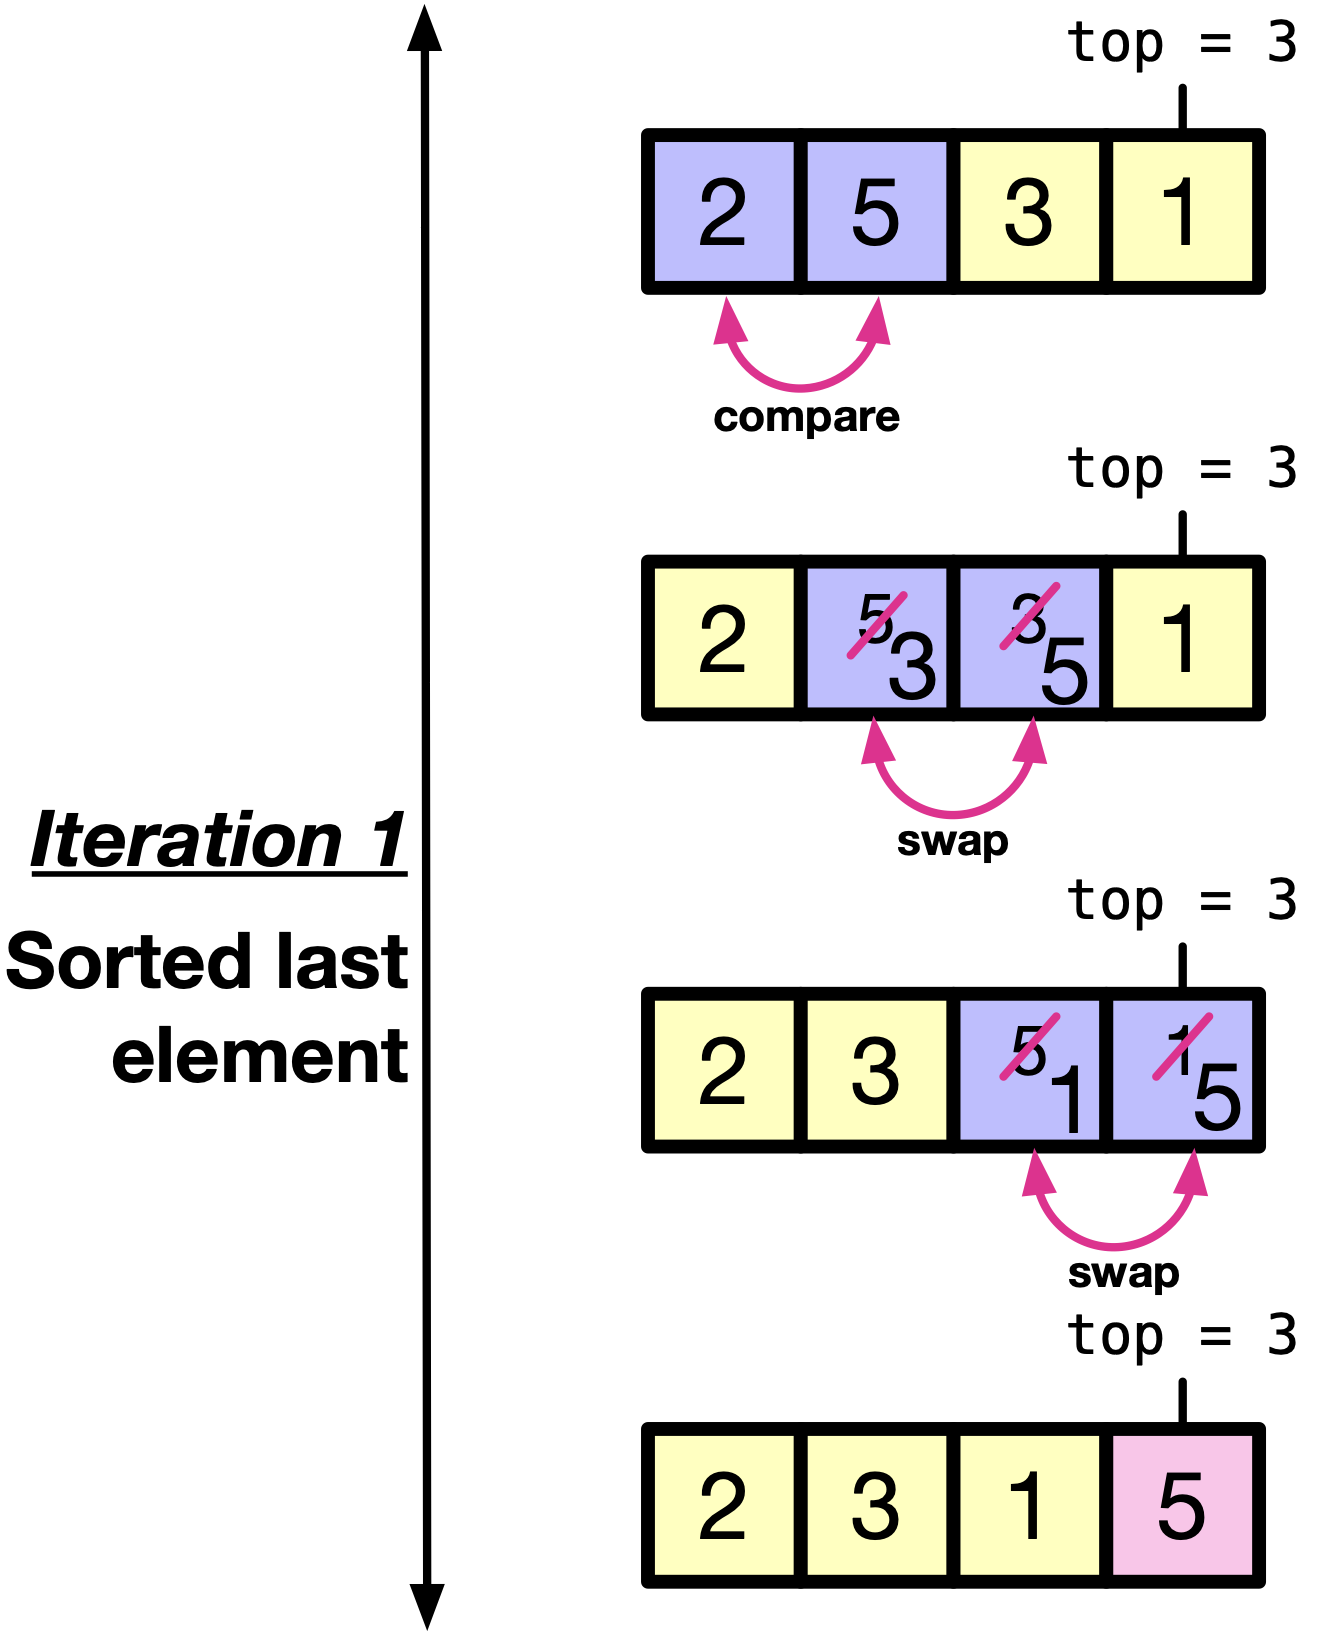 first iteration bubble sort